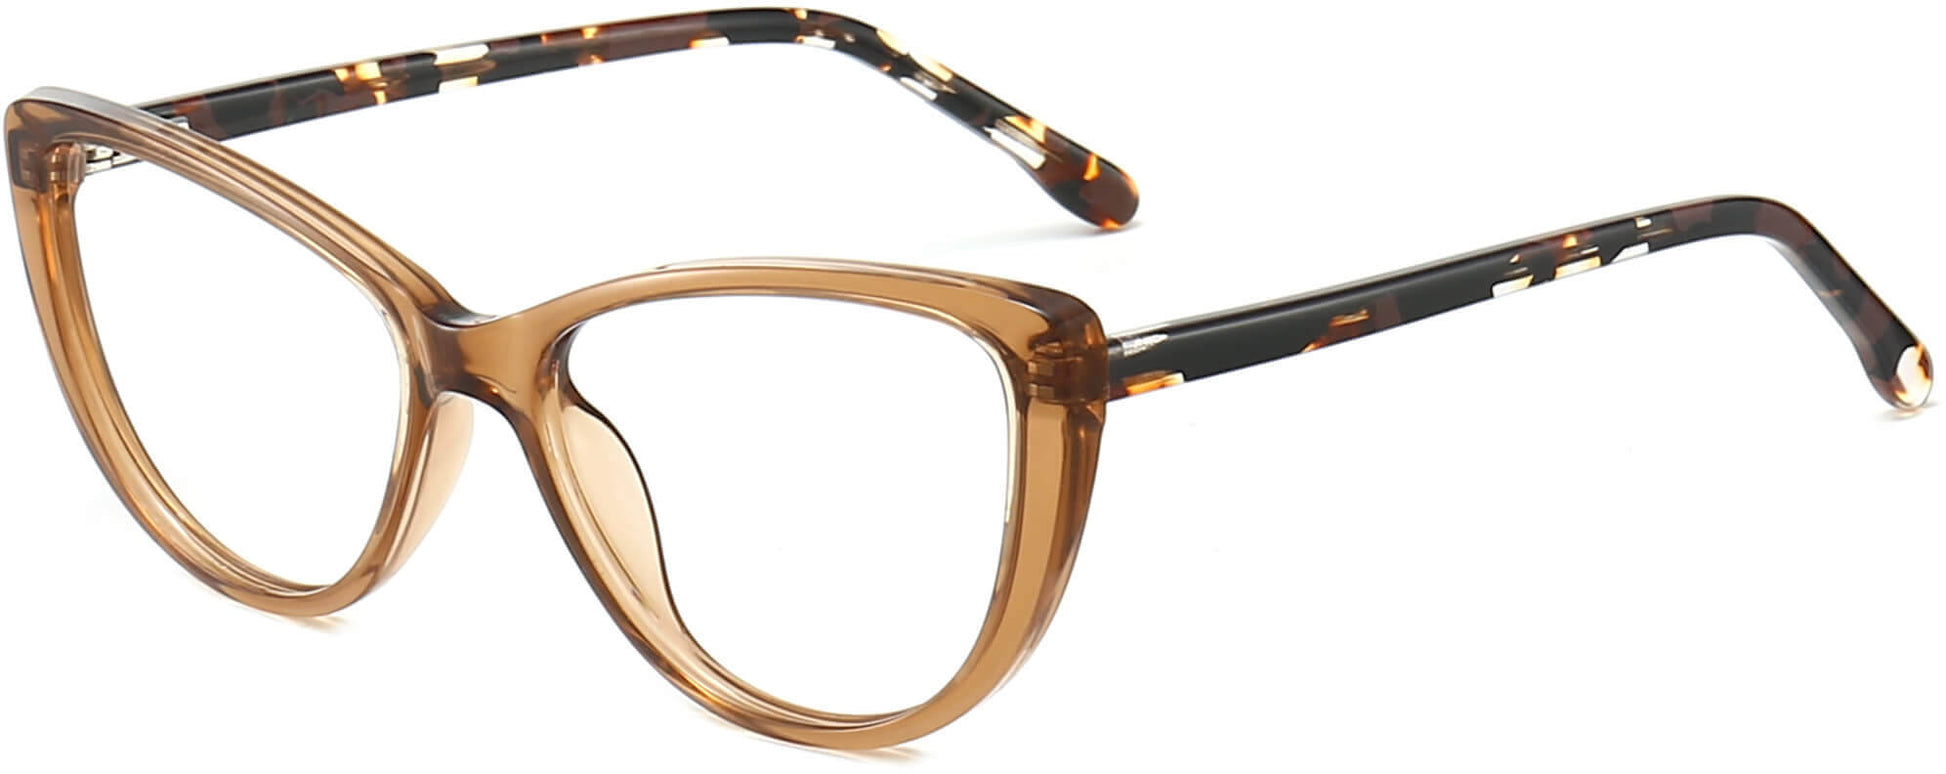 Miriam Cateye Brown Eyeglasses from ANRRI, angle view